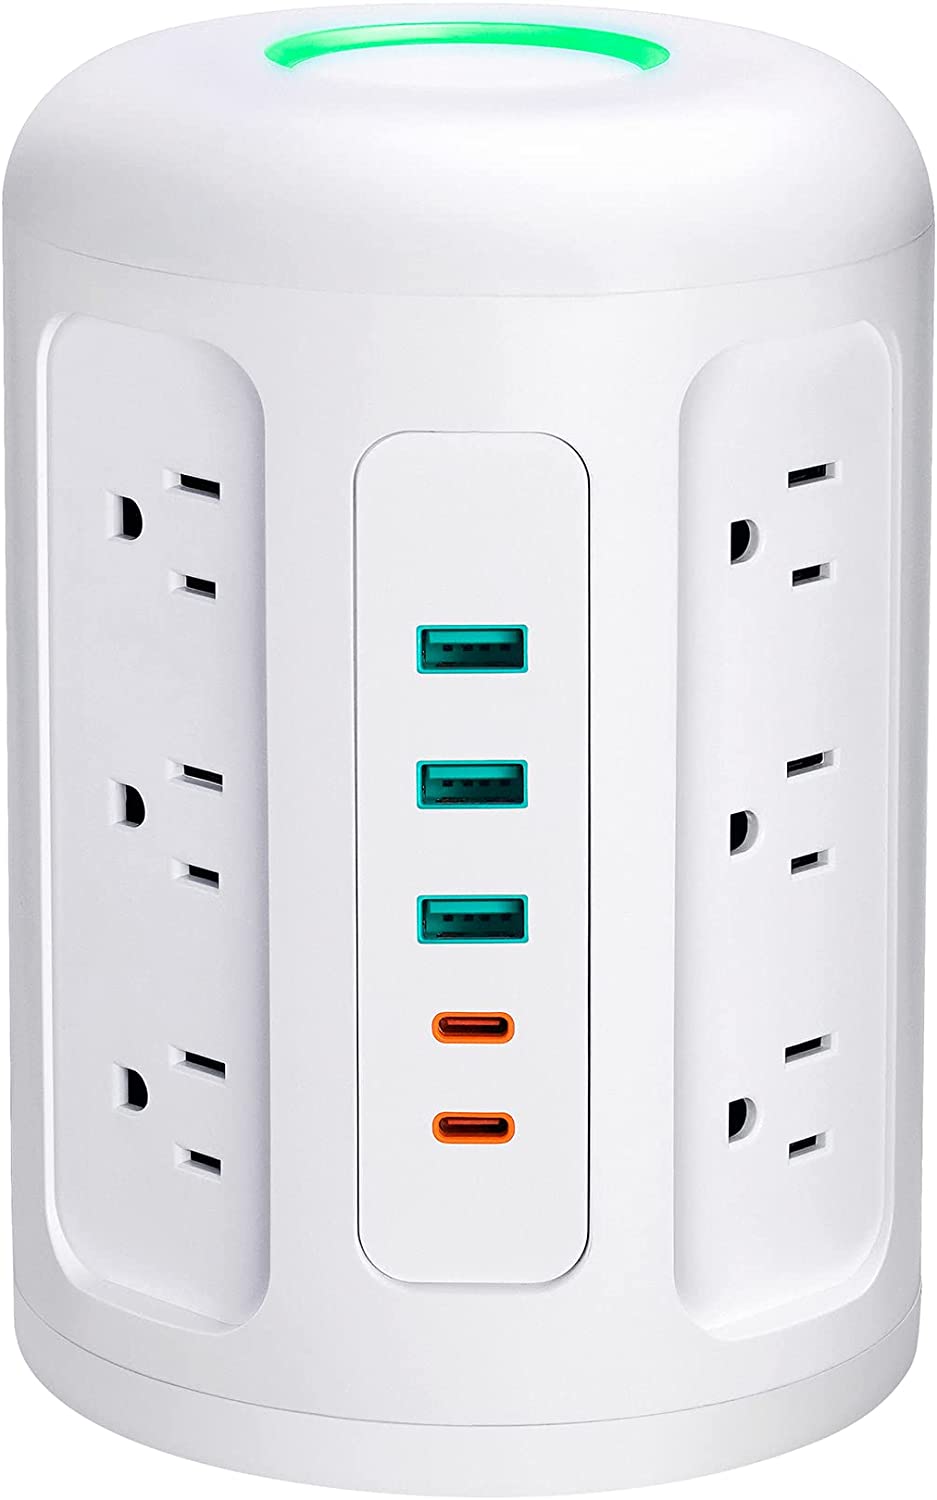 Power Strip Tower With 12 Widely Spaced AC Multiple Outlets & 6 USB Ports for Phones - Smart Tech Shopping